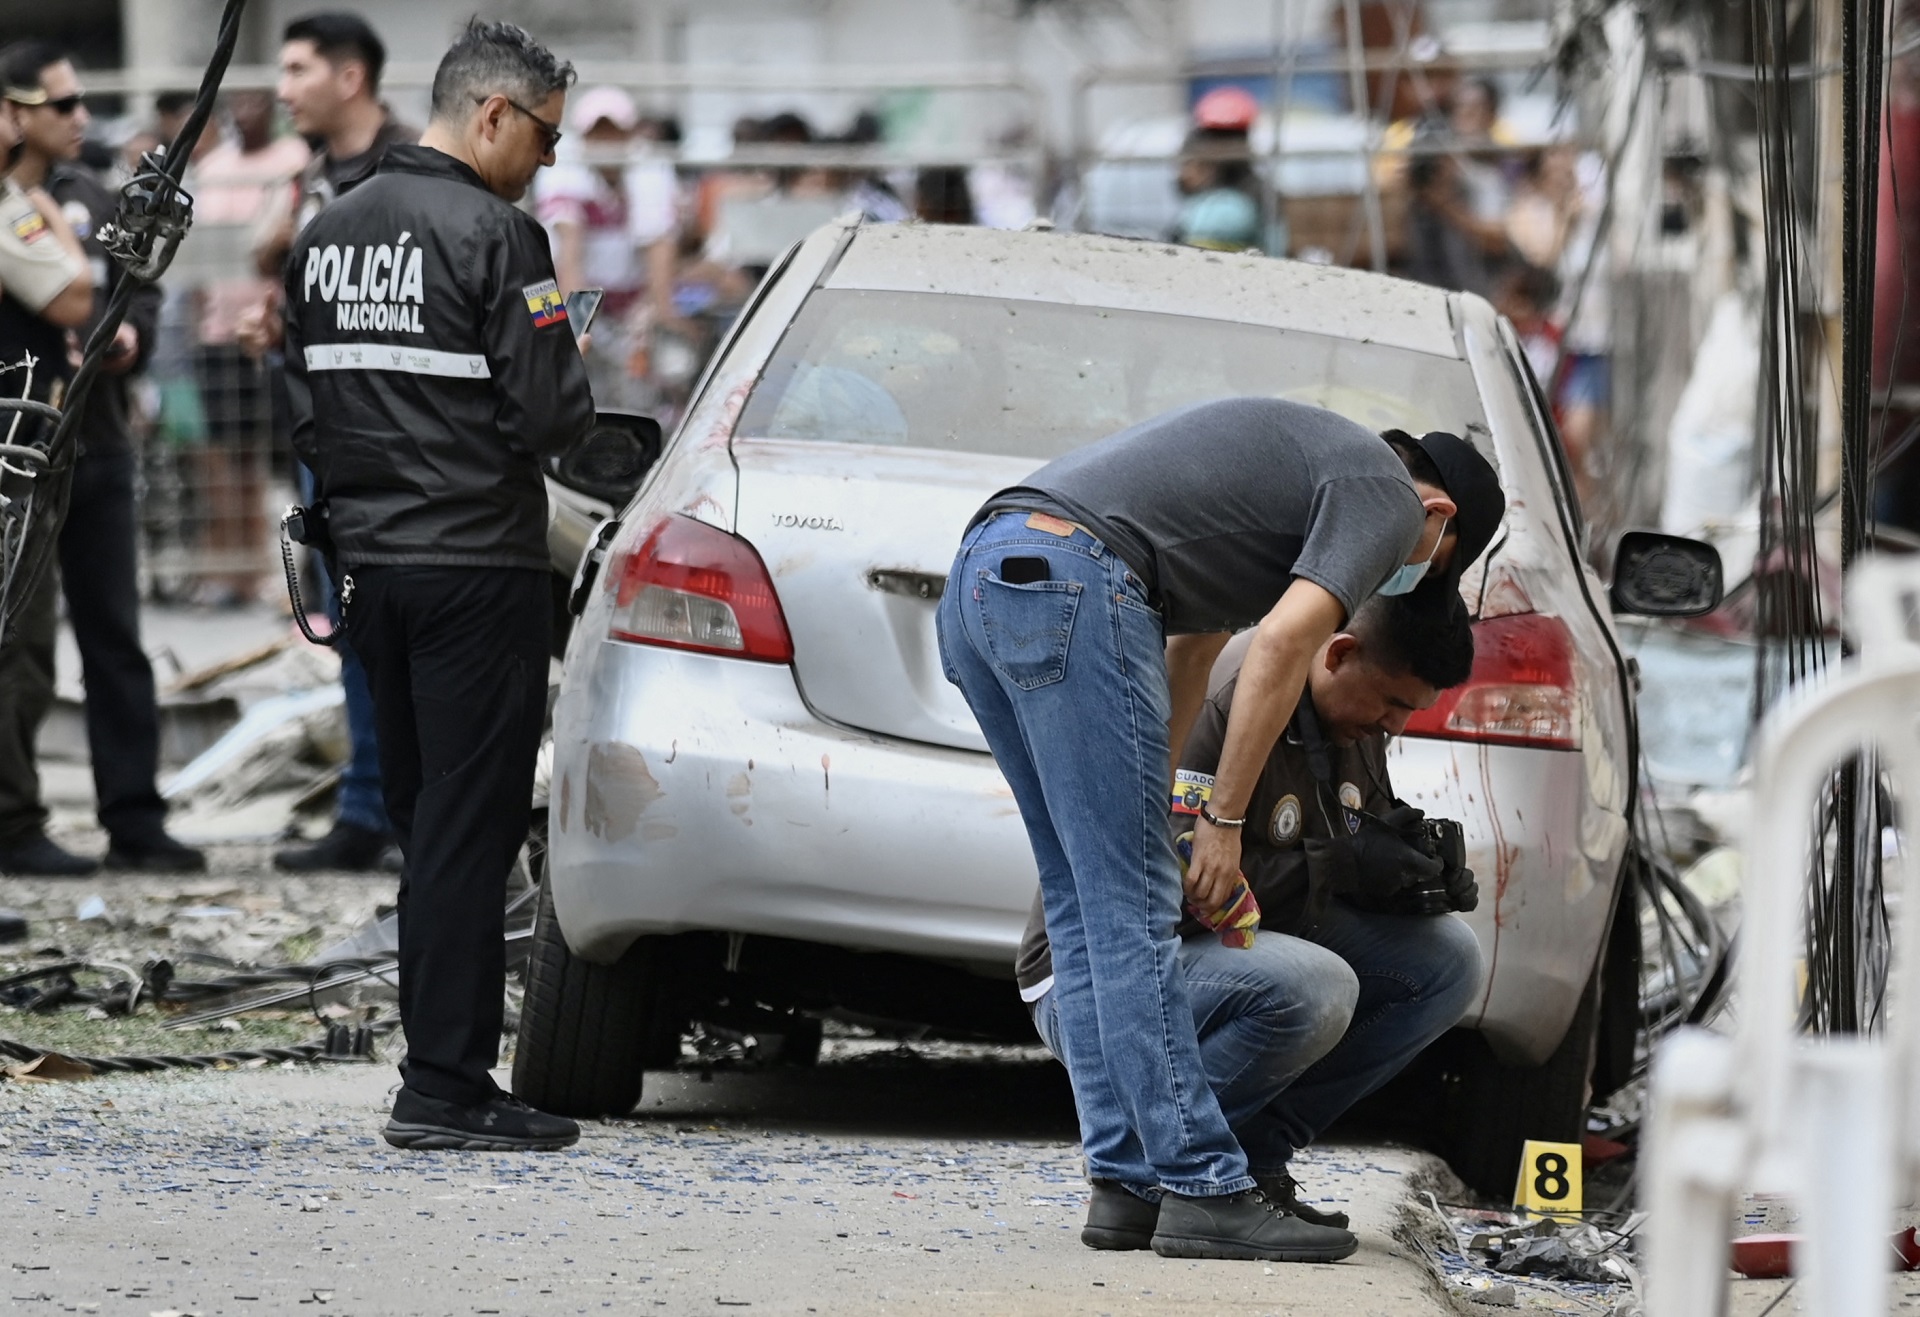 Members of the National Police examine the site of an explosion that the Ecuadorian government blames on organized crime, south of Guayaquil, Ecuador, on August 14, 2022 (AFP)